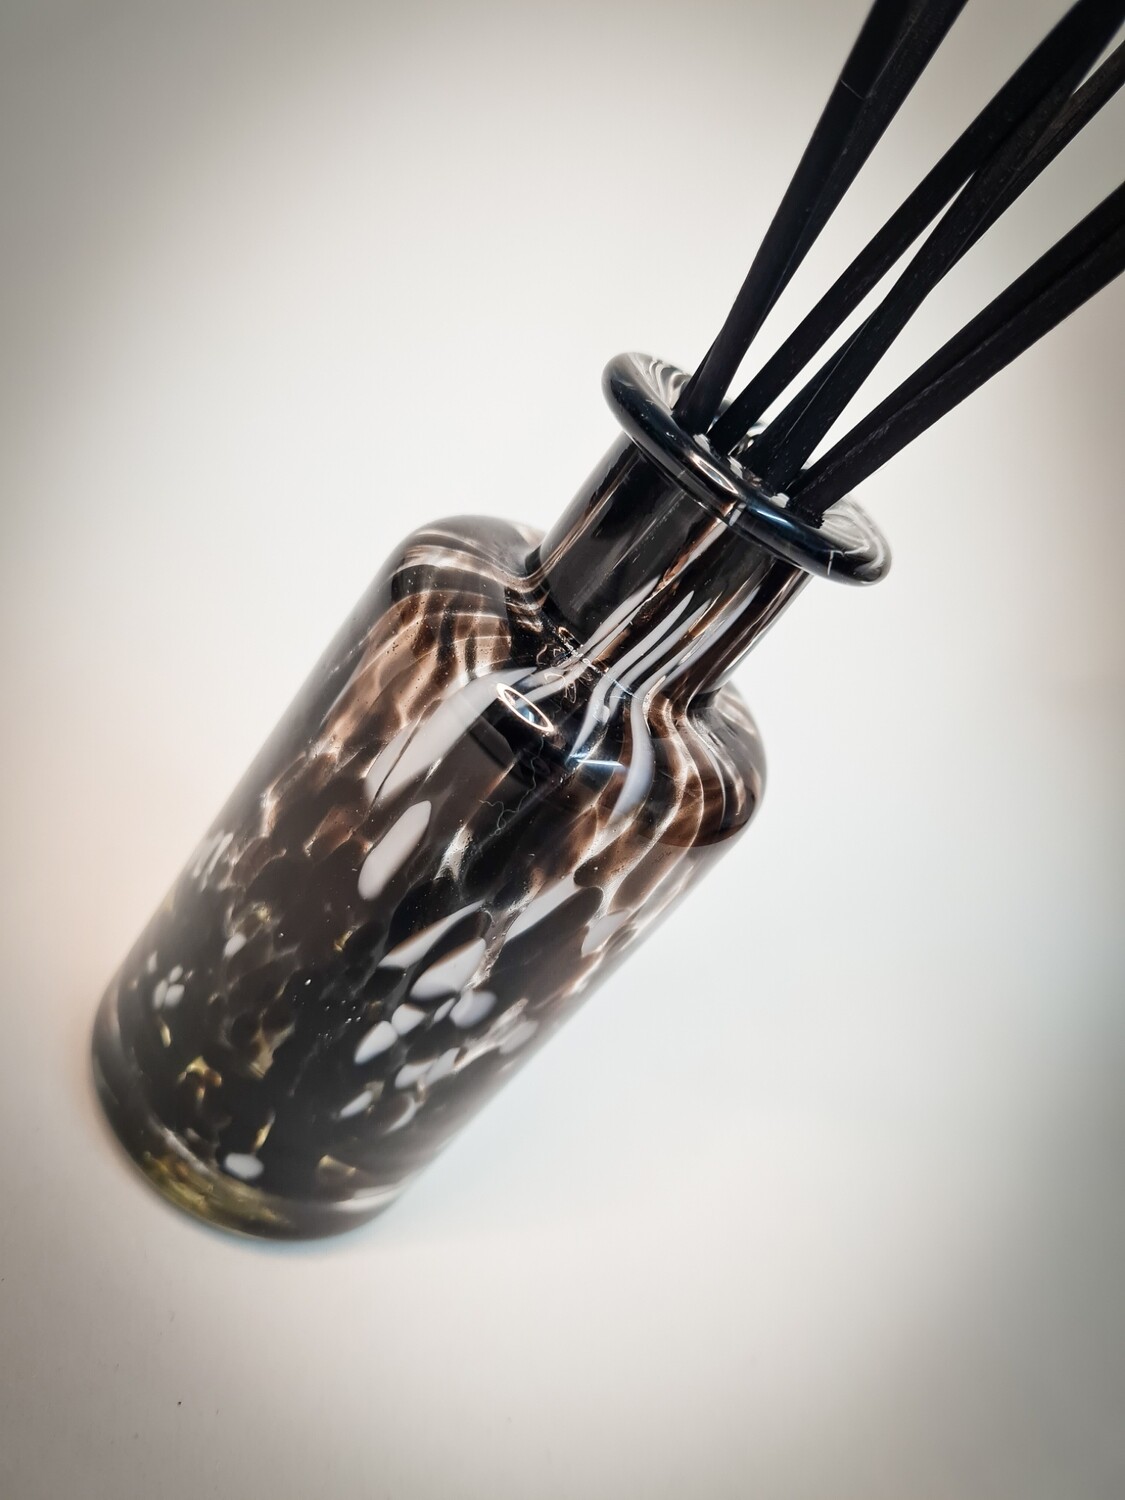 Moon Lake Musk Reed Diffuser in Luxury Glass Container